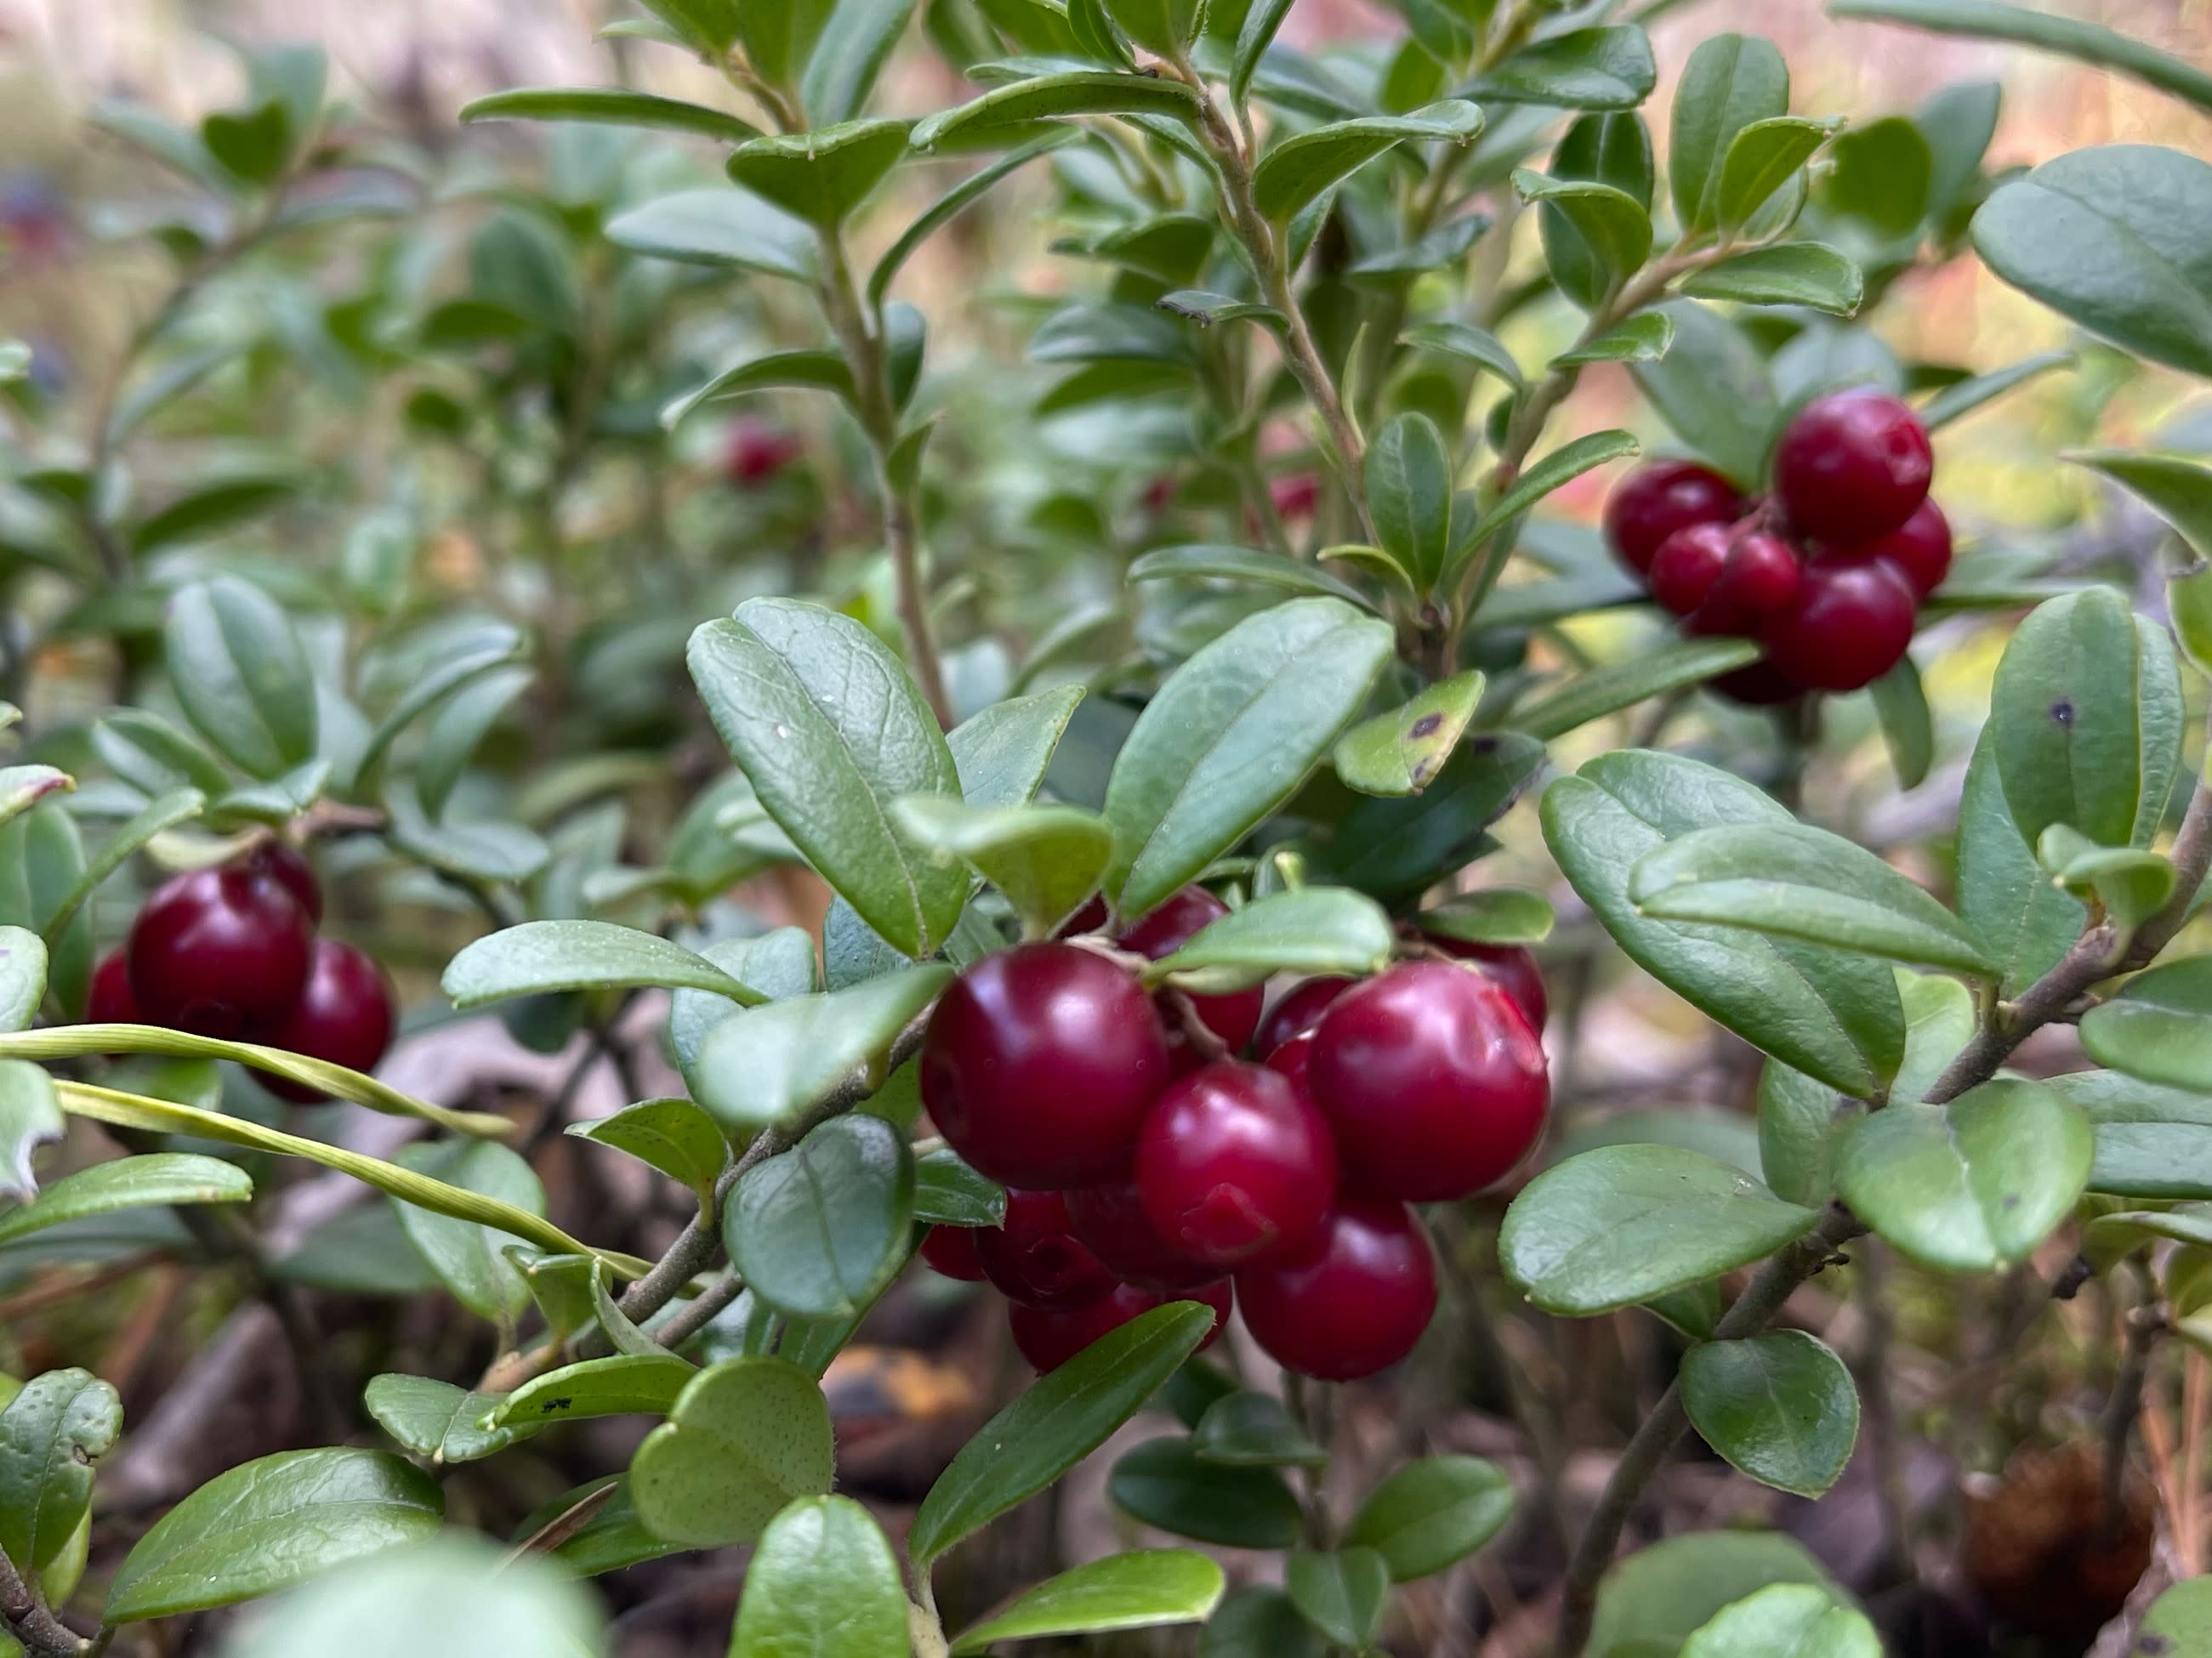 A rich lingonberry harvest is expected this fall